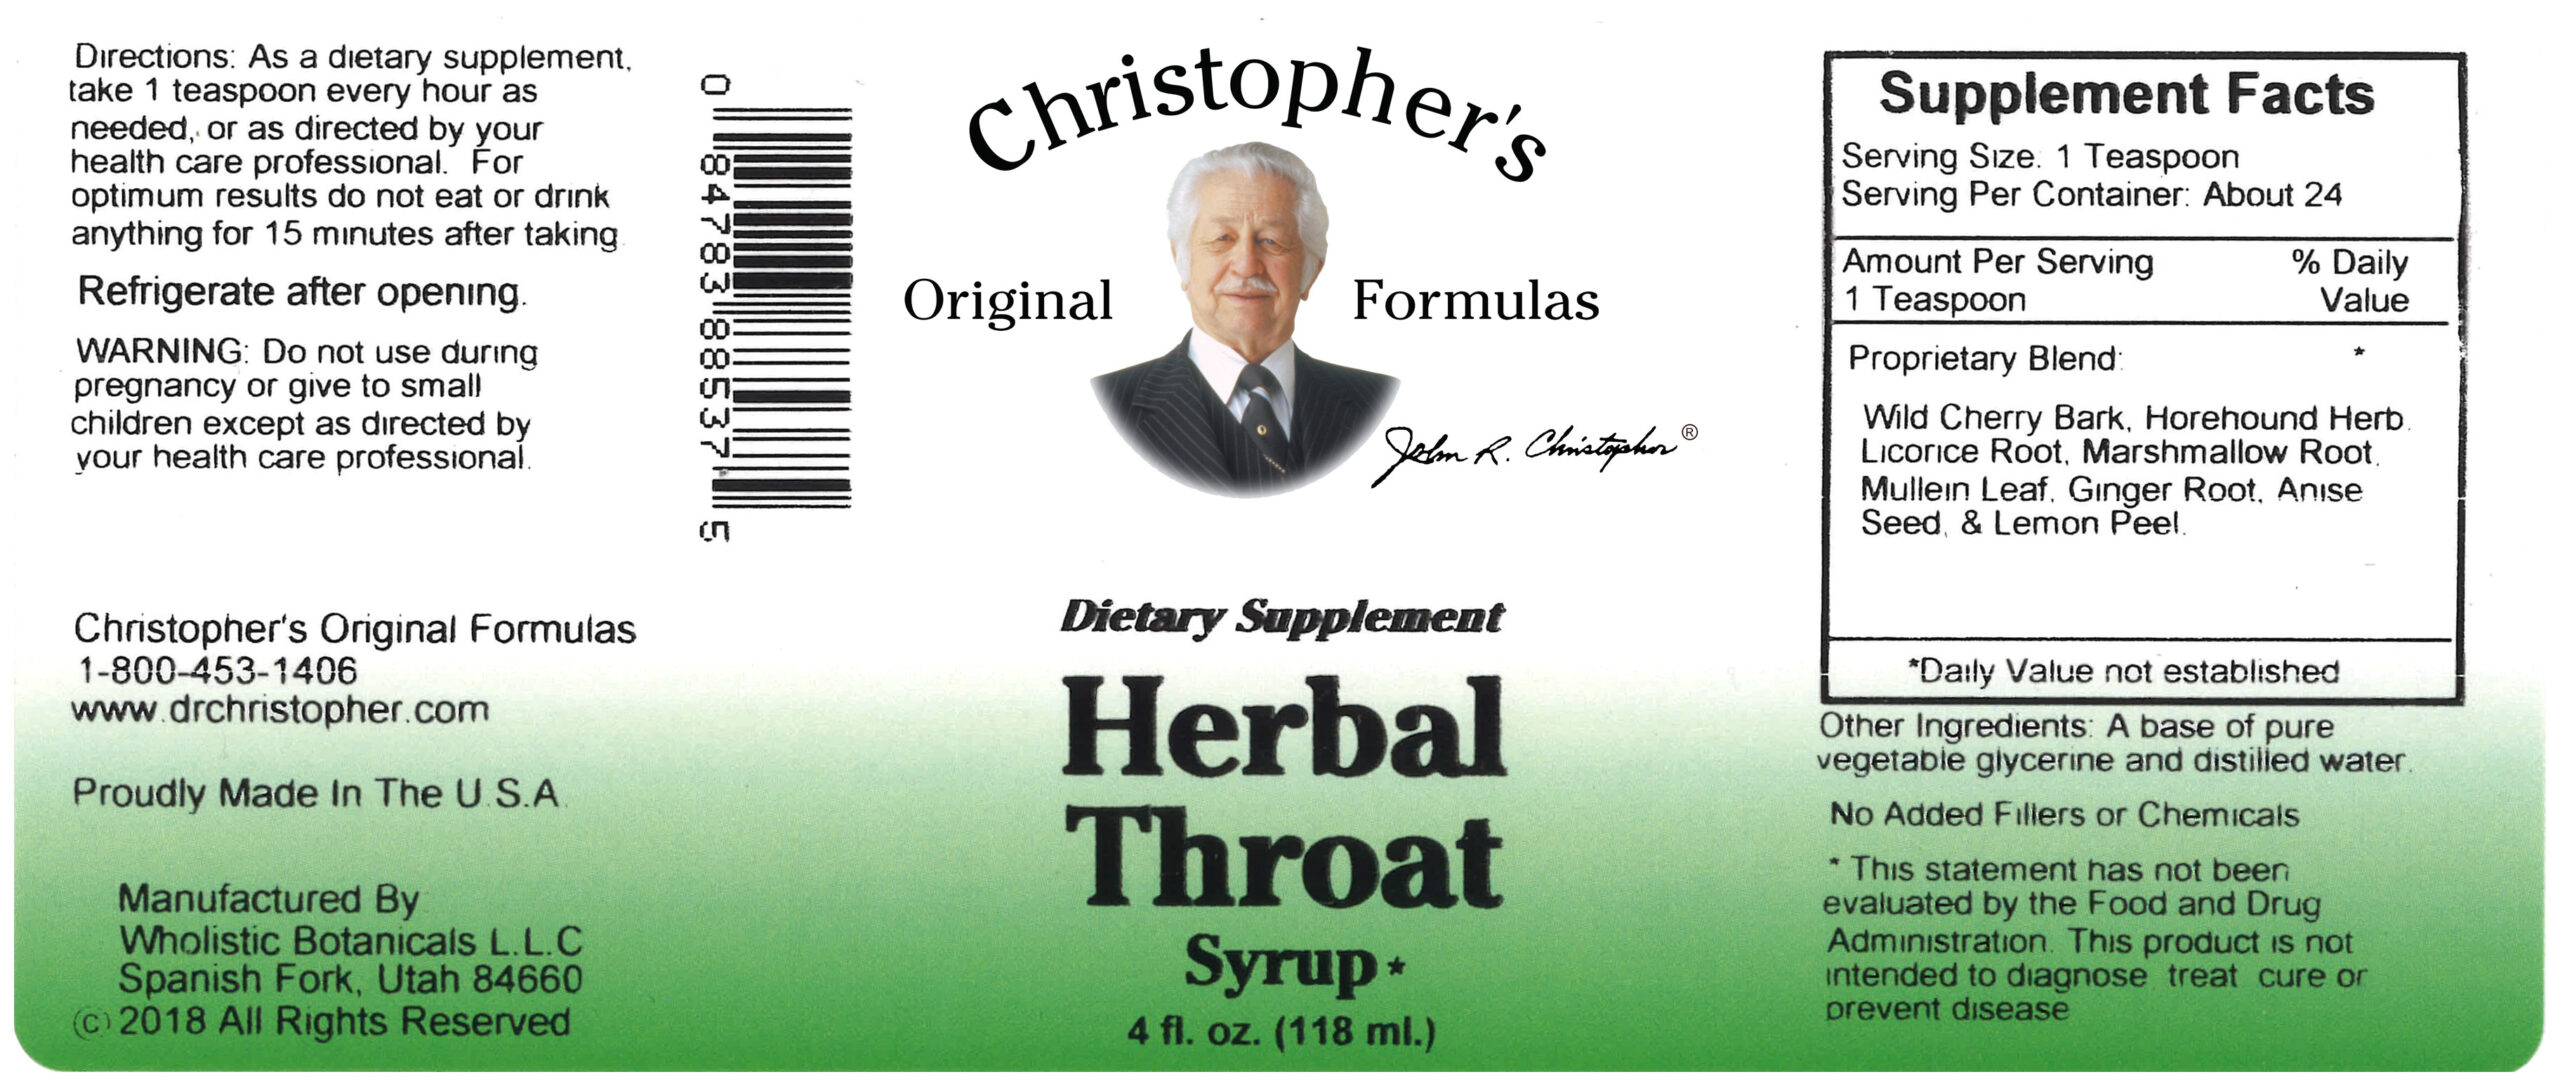 Dr Christophers Herbal Throat Syrup Supplement Facts